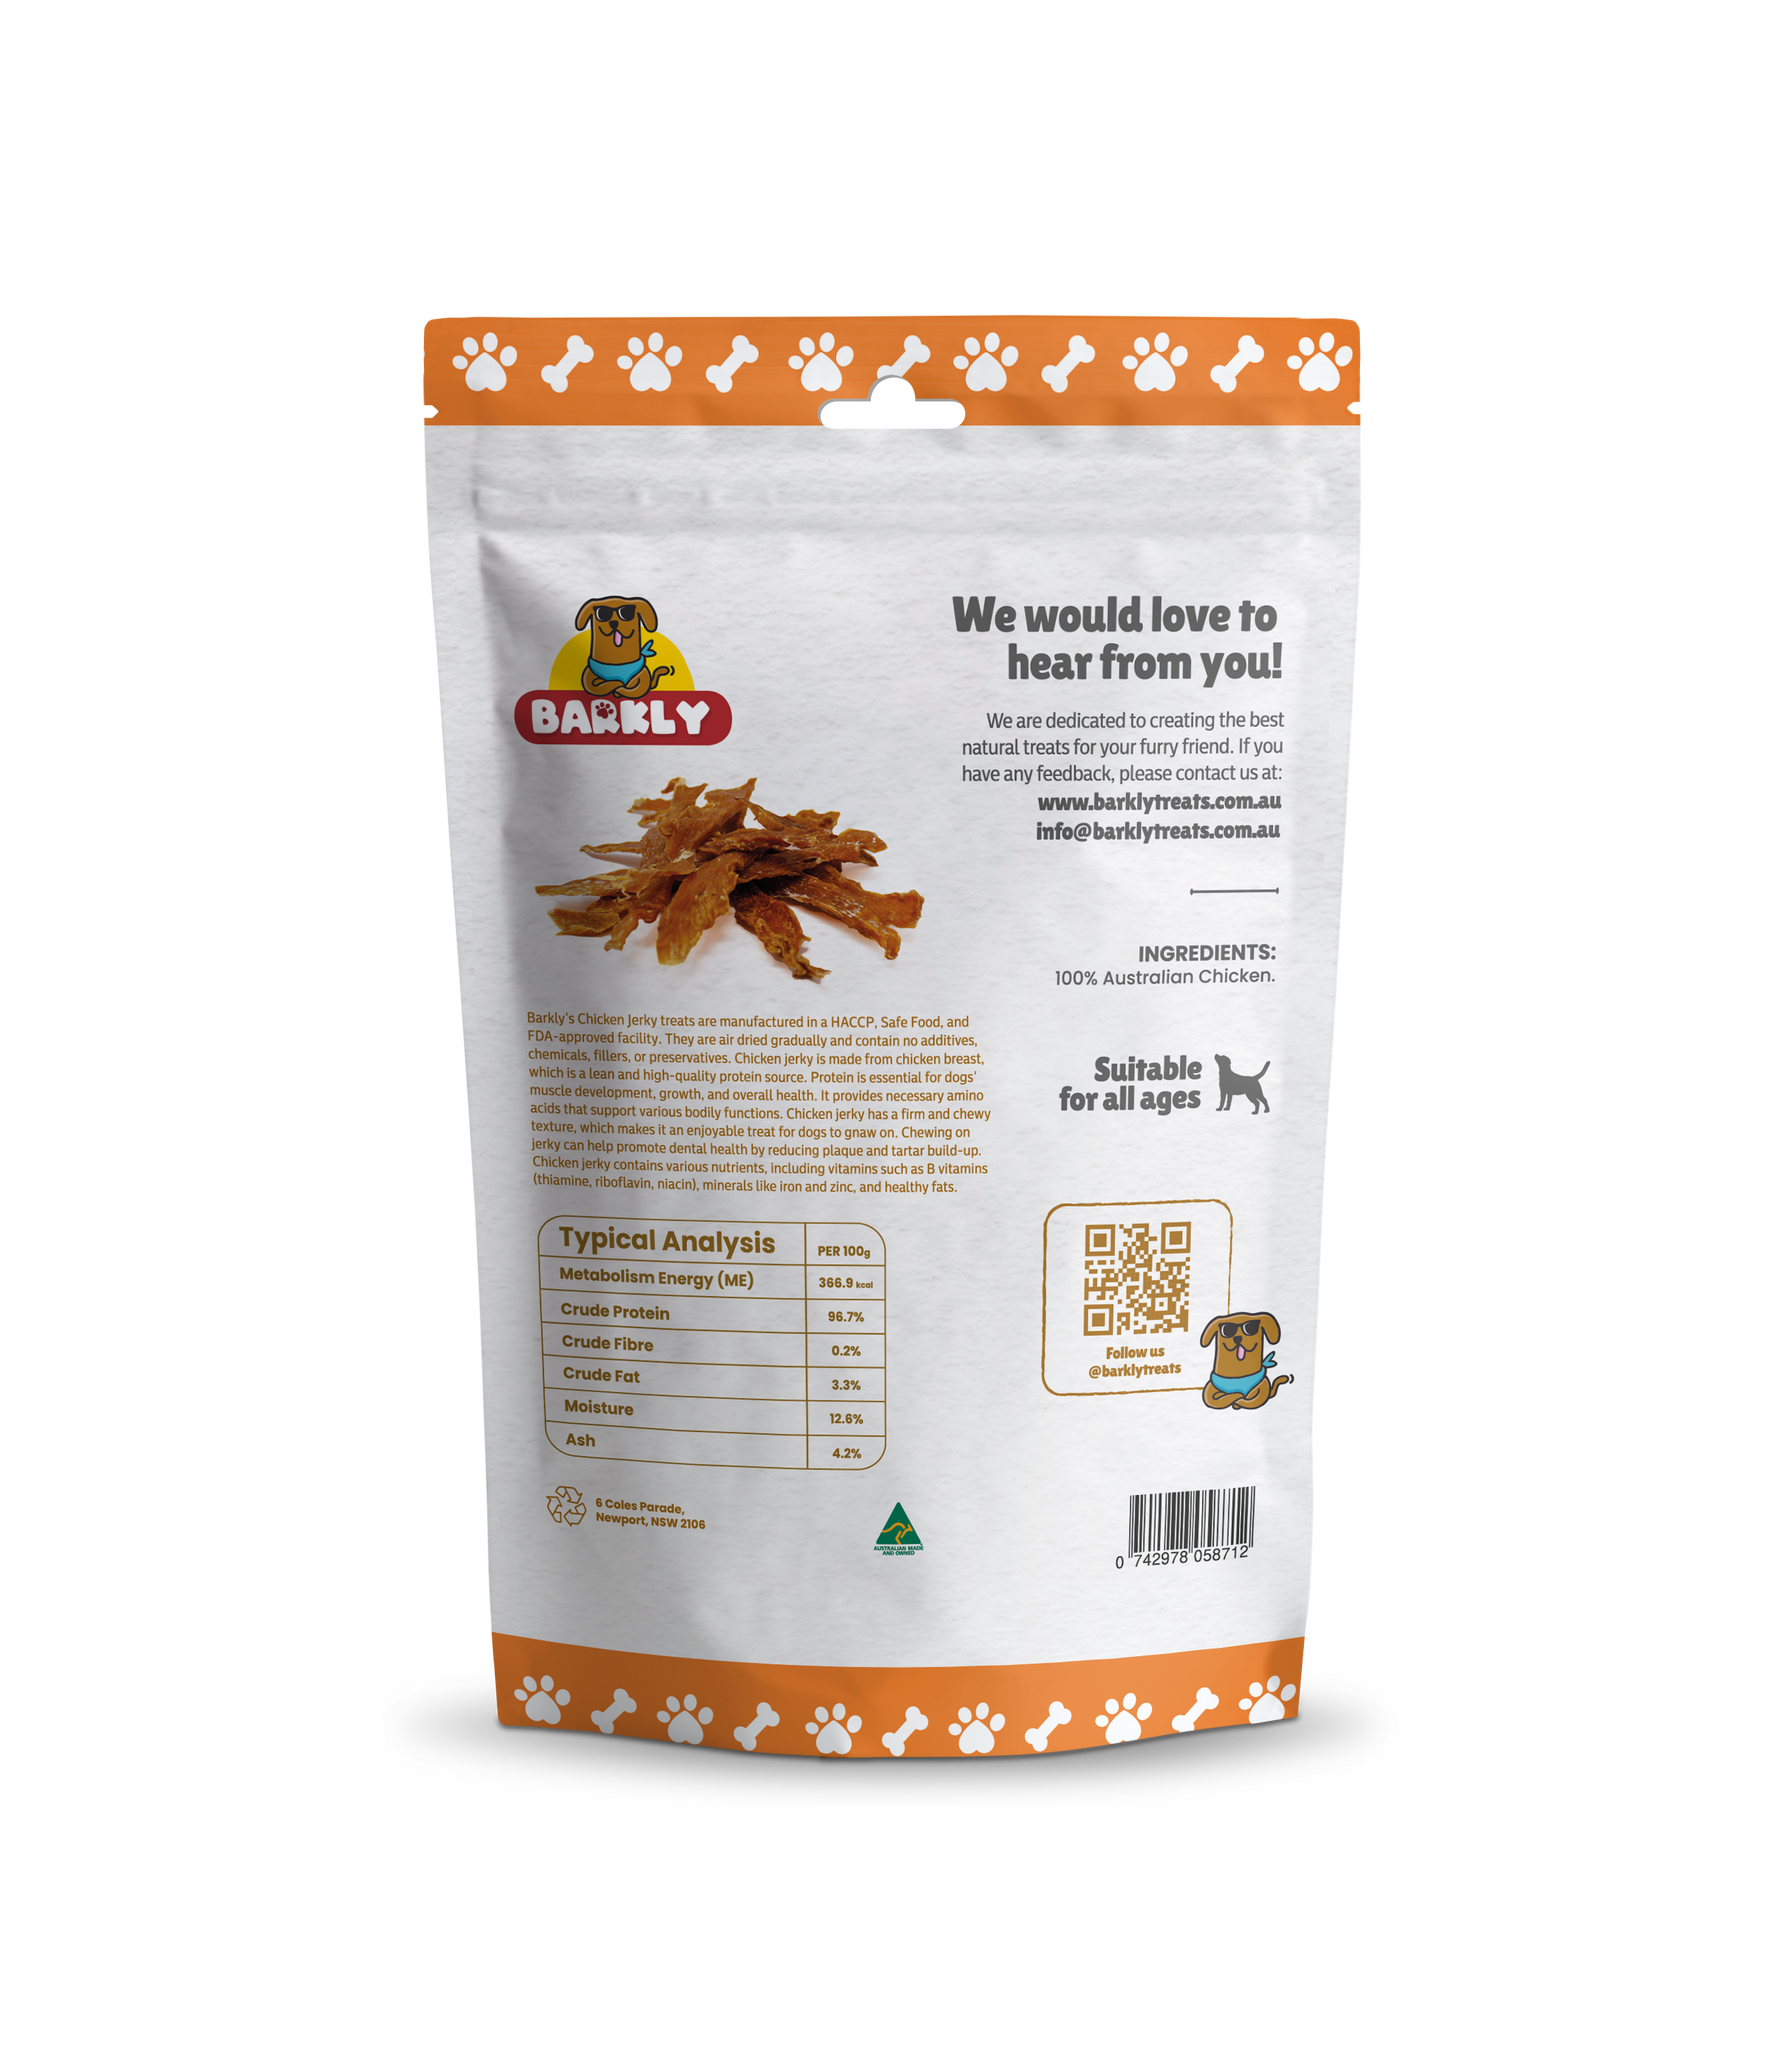 Packaged Chicken Jerky dog treats with a "barkly label